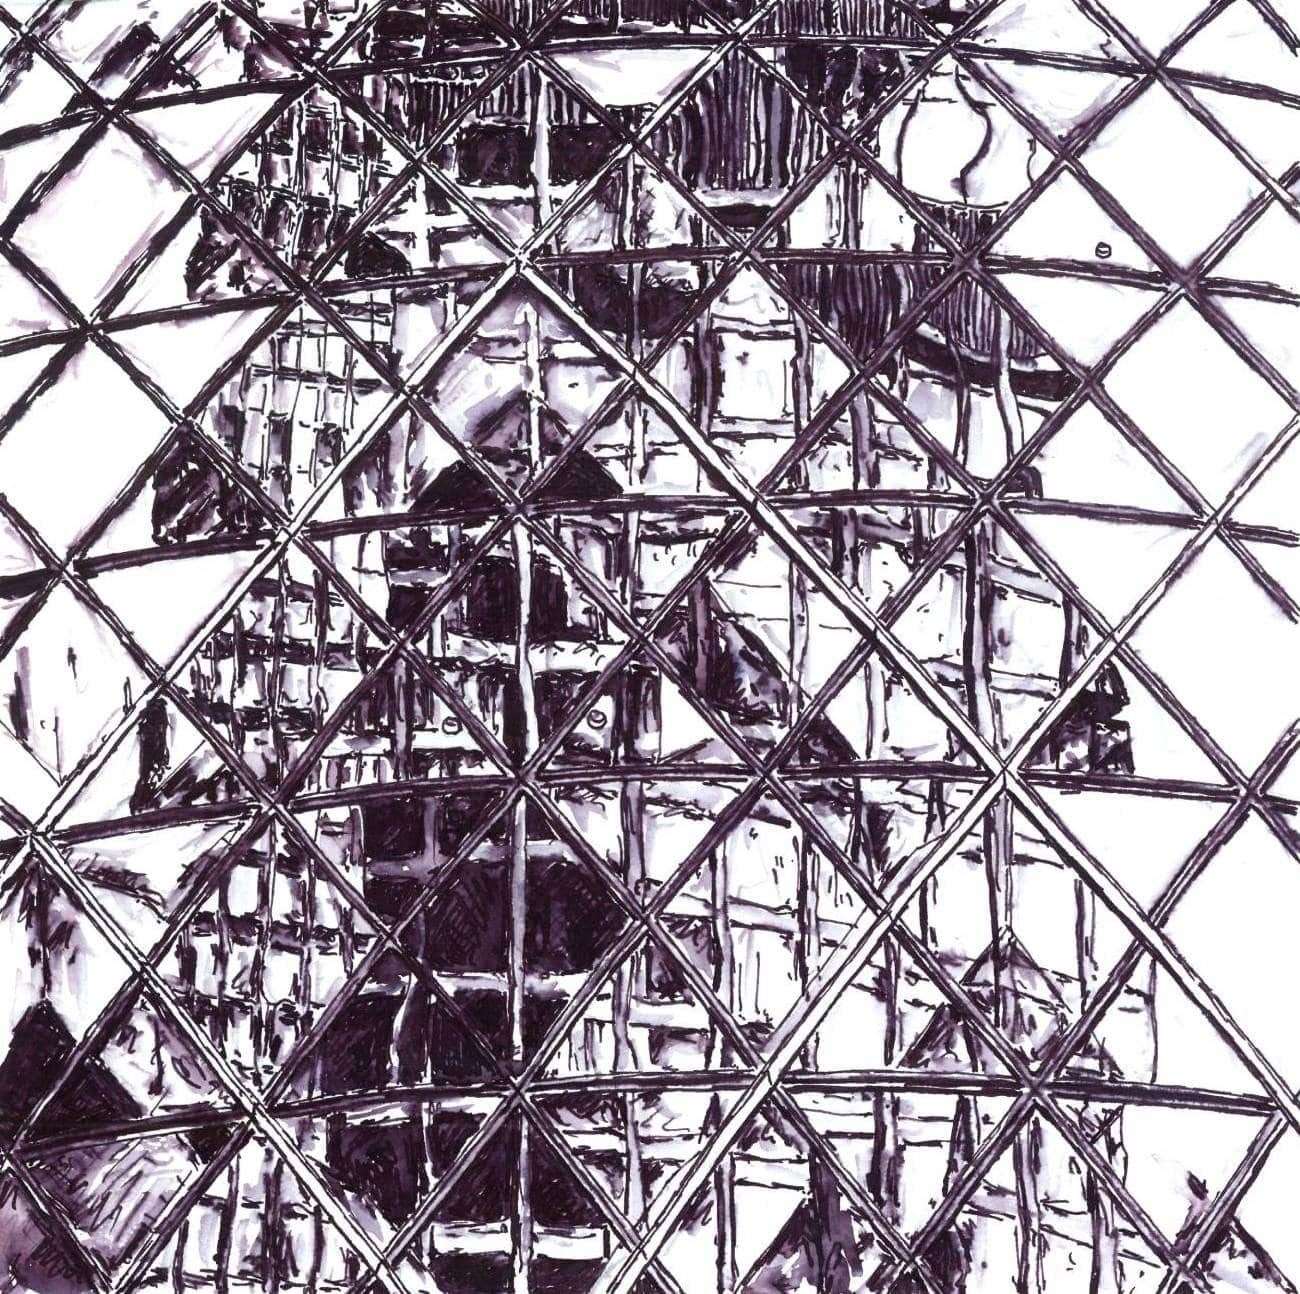 Jack Hines and his intricate drawings of London buildings such as the Gherkin